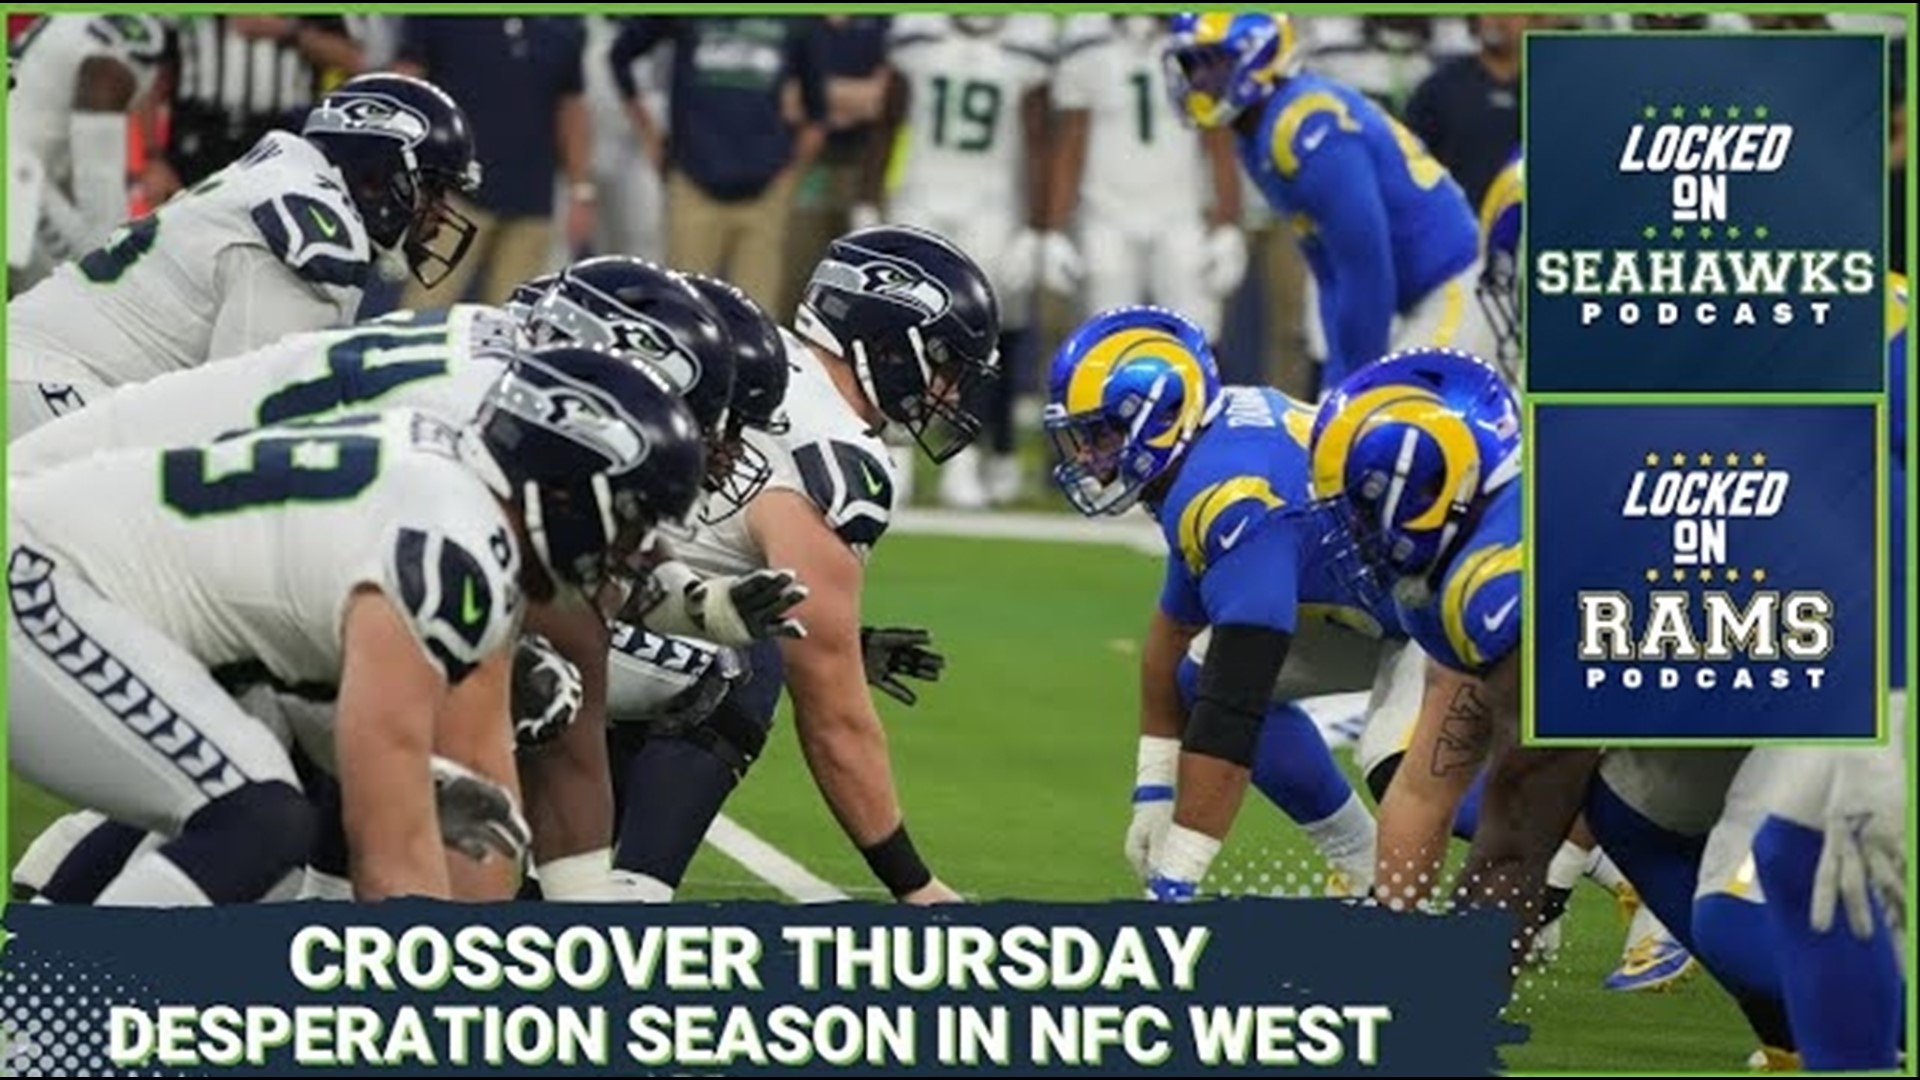 For different reasons, the Seahawks and Rams will have a heightened sense of urgency when they face off for the first time in 2022 at SoFi Stadium on Sunday.